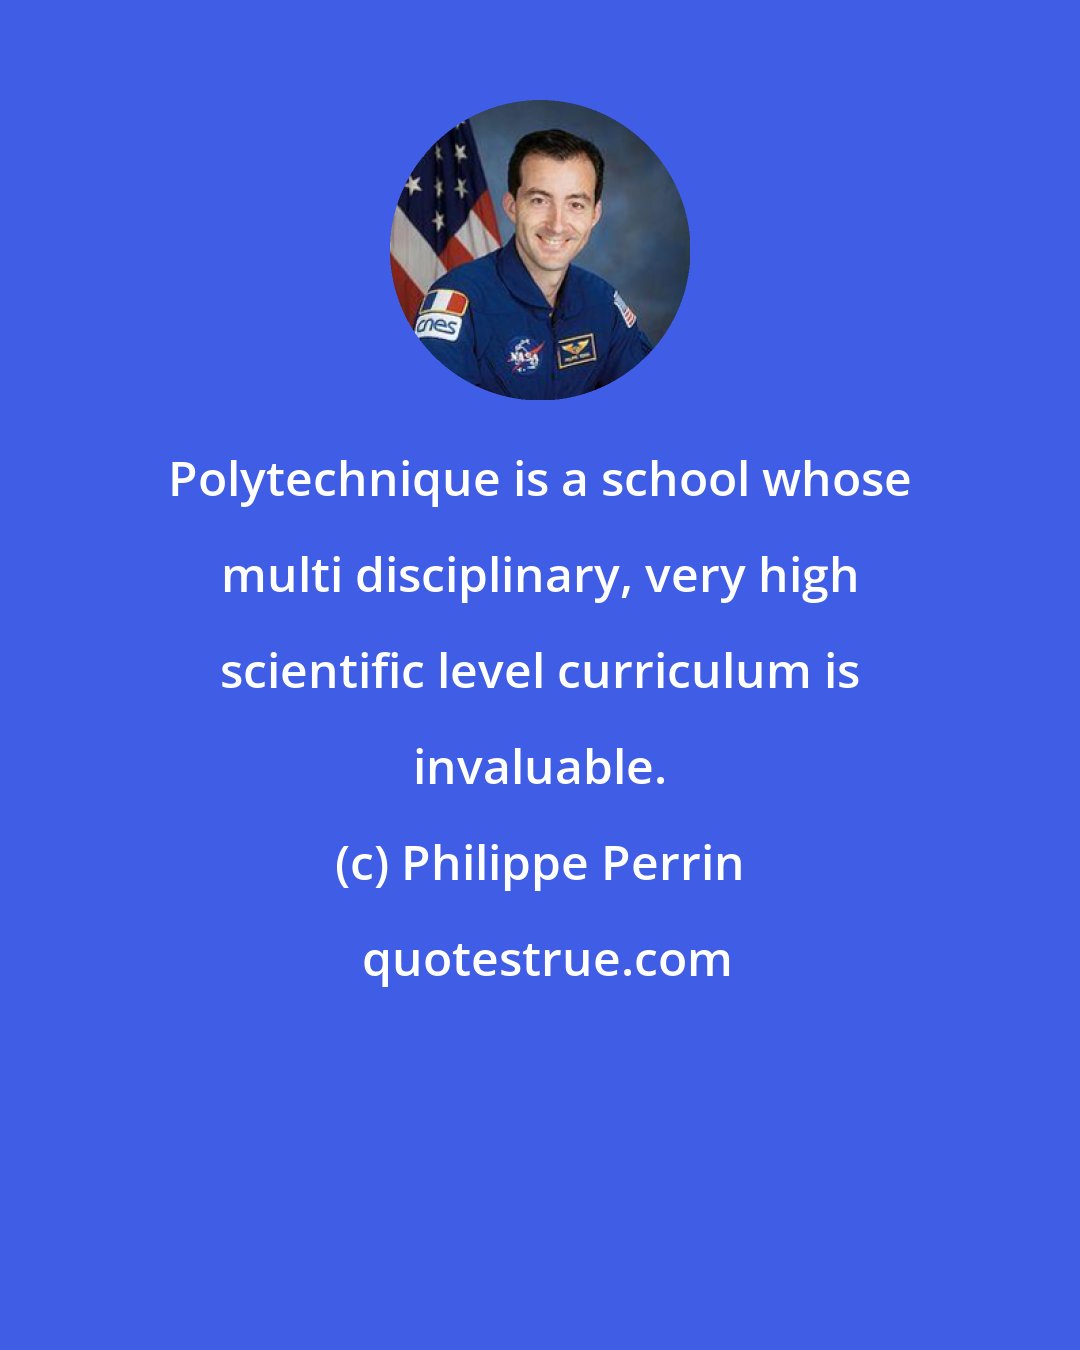 Philippe Perrin: Polytechnique is a school whose multi disciplinary, very high scientific level curriculum is invaluable.